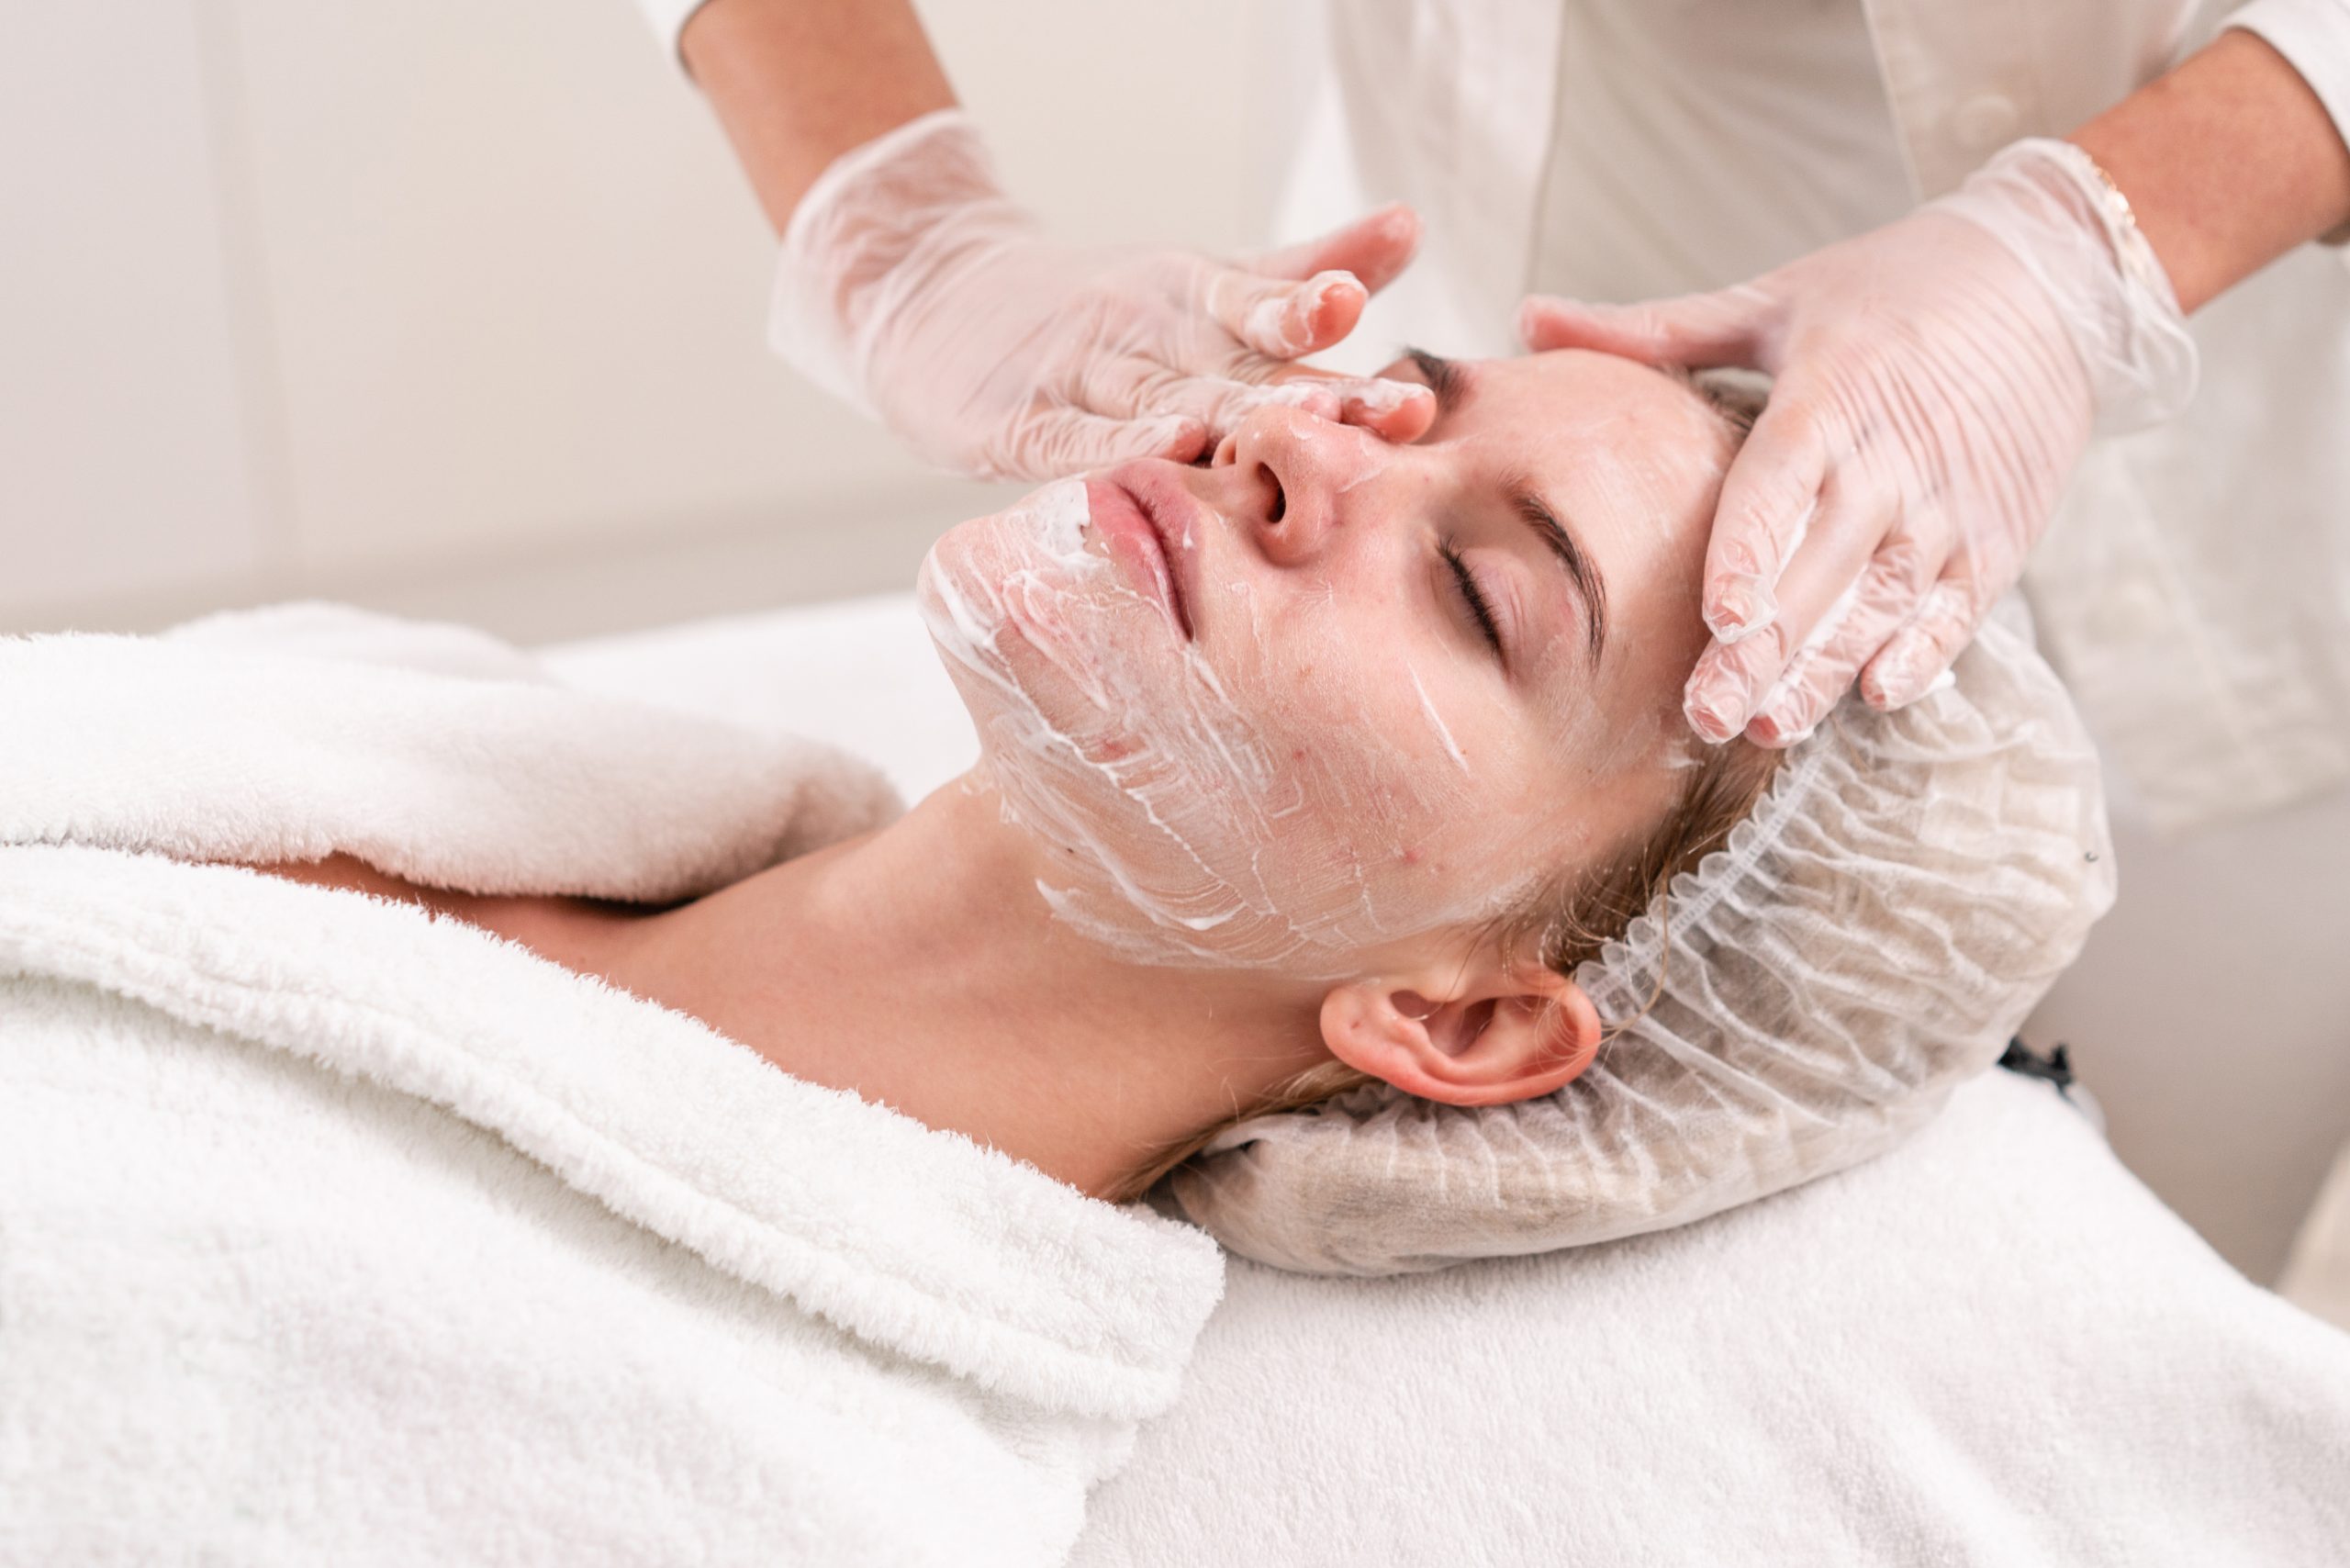 A woman receives topical acne treatment from a professional skincare provider